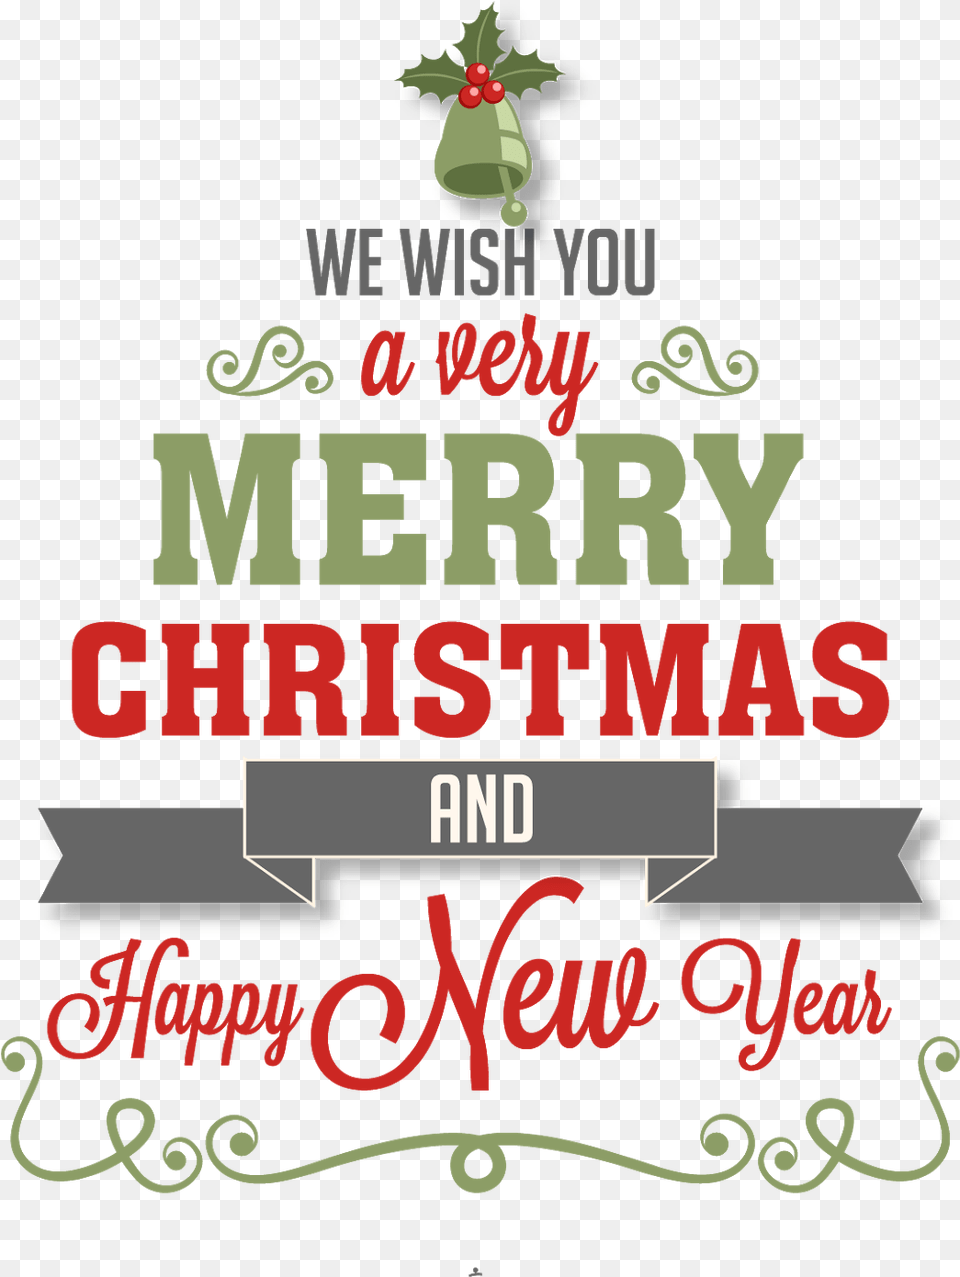 Happy New Year Clipart Merry Christmas Illustration Merry Christmas Clip Art, Advertisement, Poster, Text Png Image